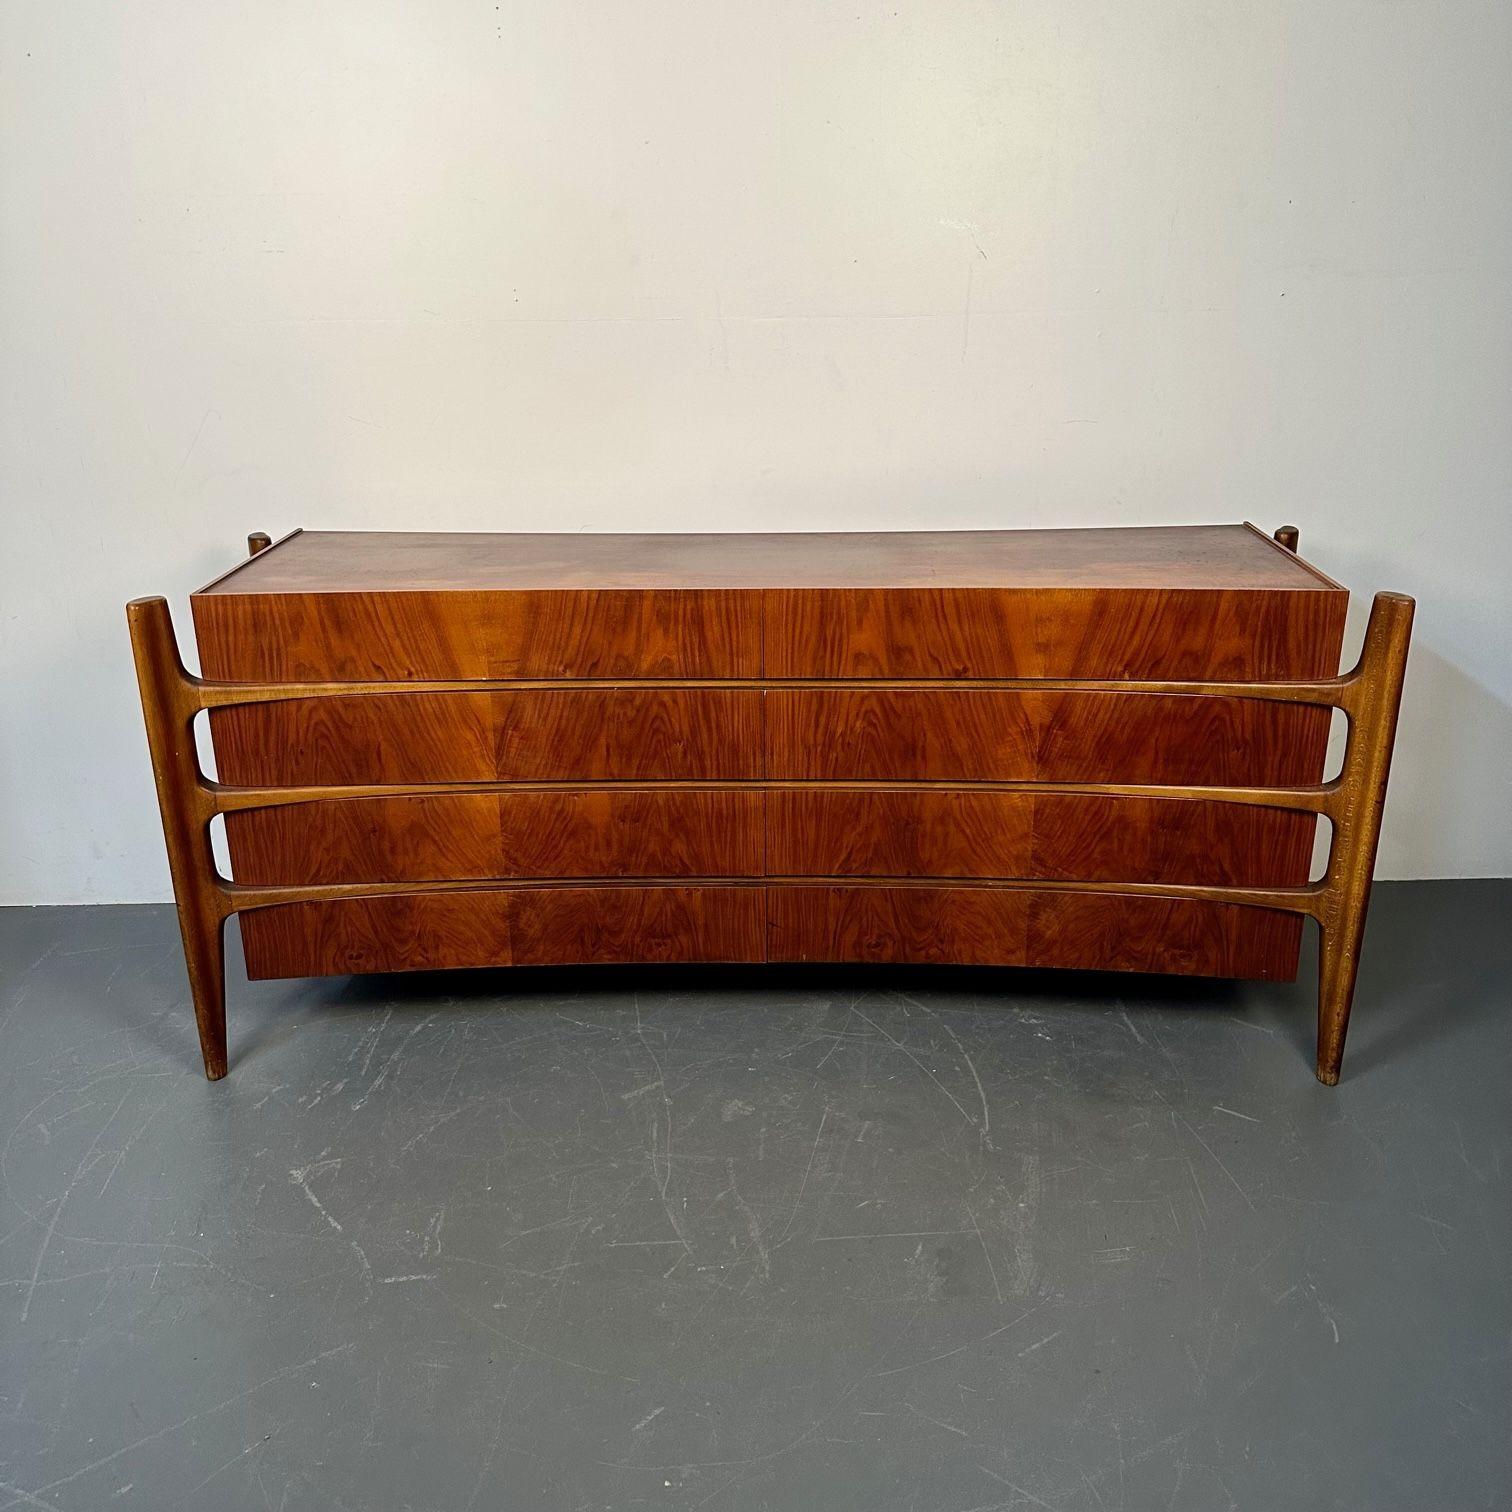 William Hinn, Swedish Mid-Century Modern, Sculptural Exoskeleton Dressers, 1960s In Good Condition For Sale In Stamford, CT